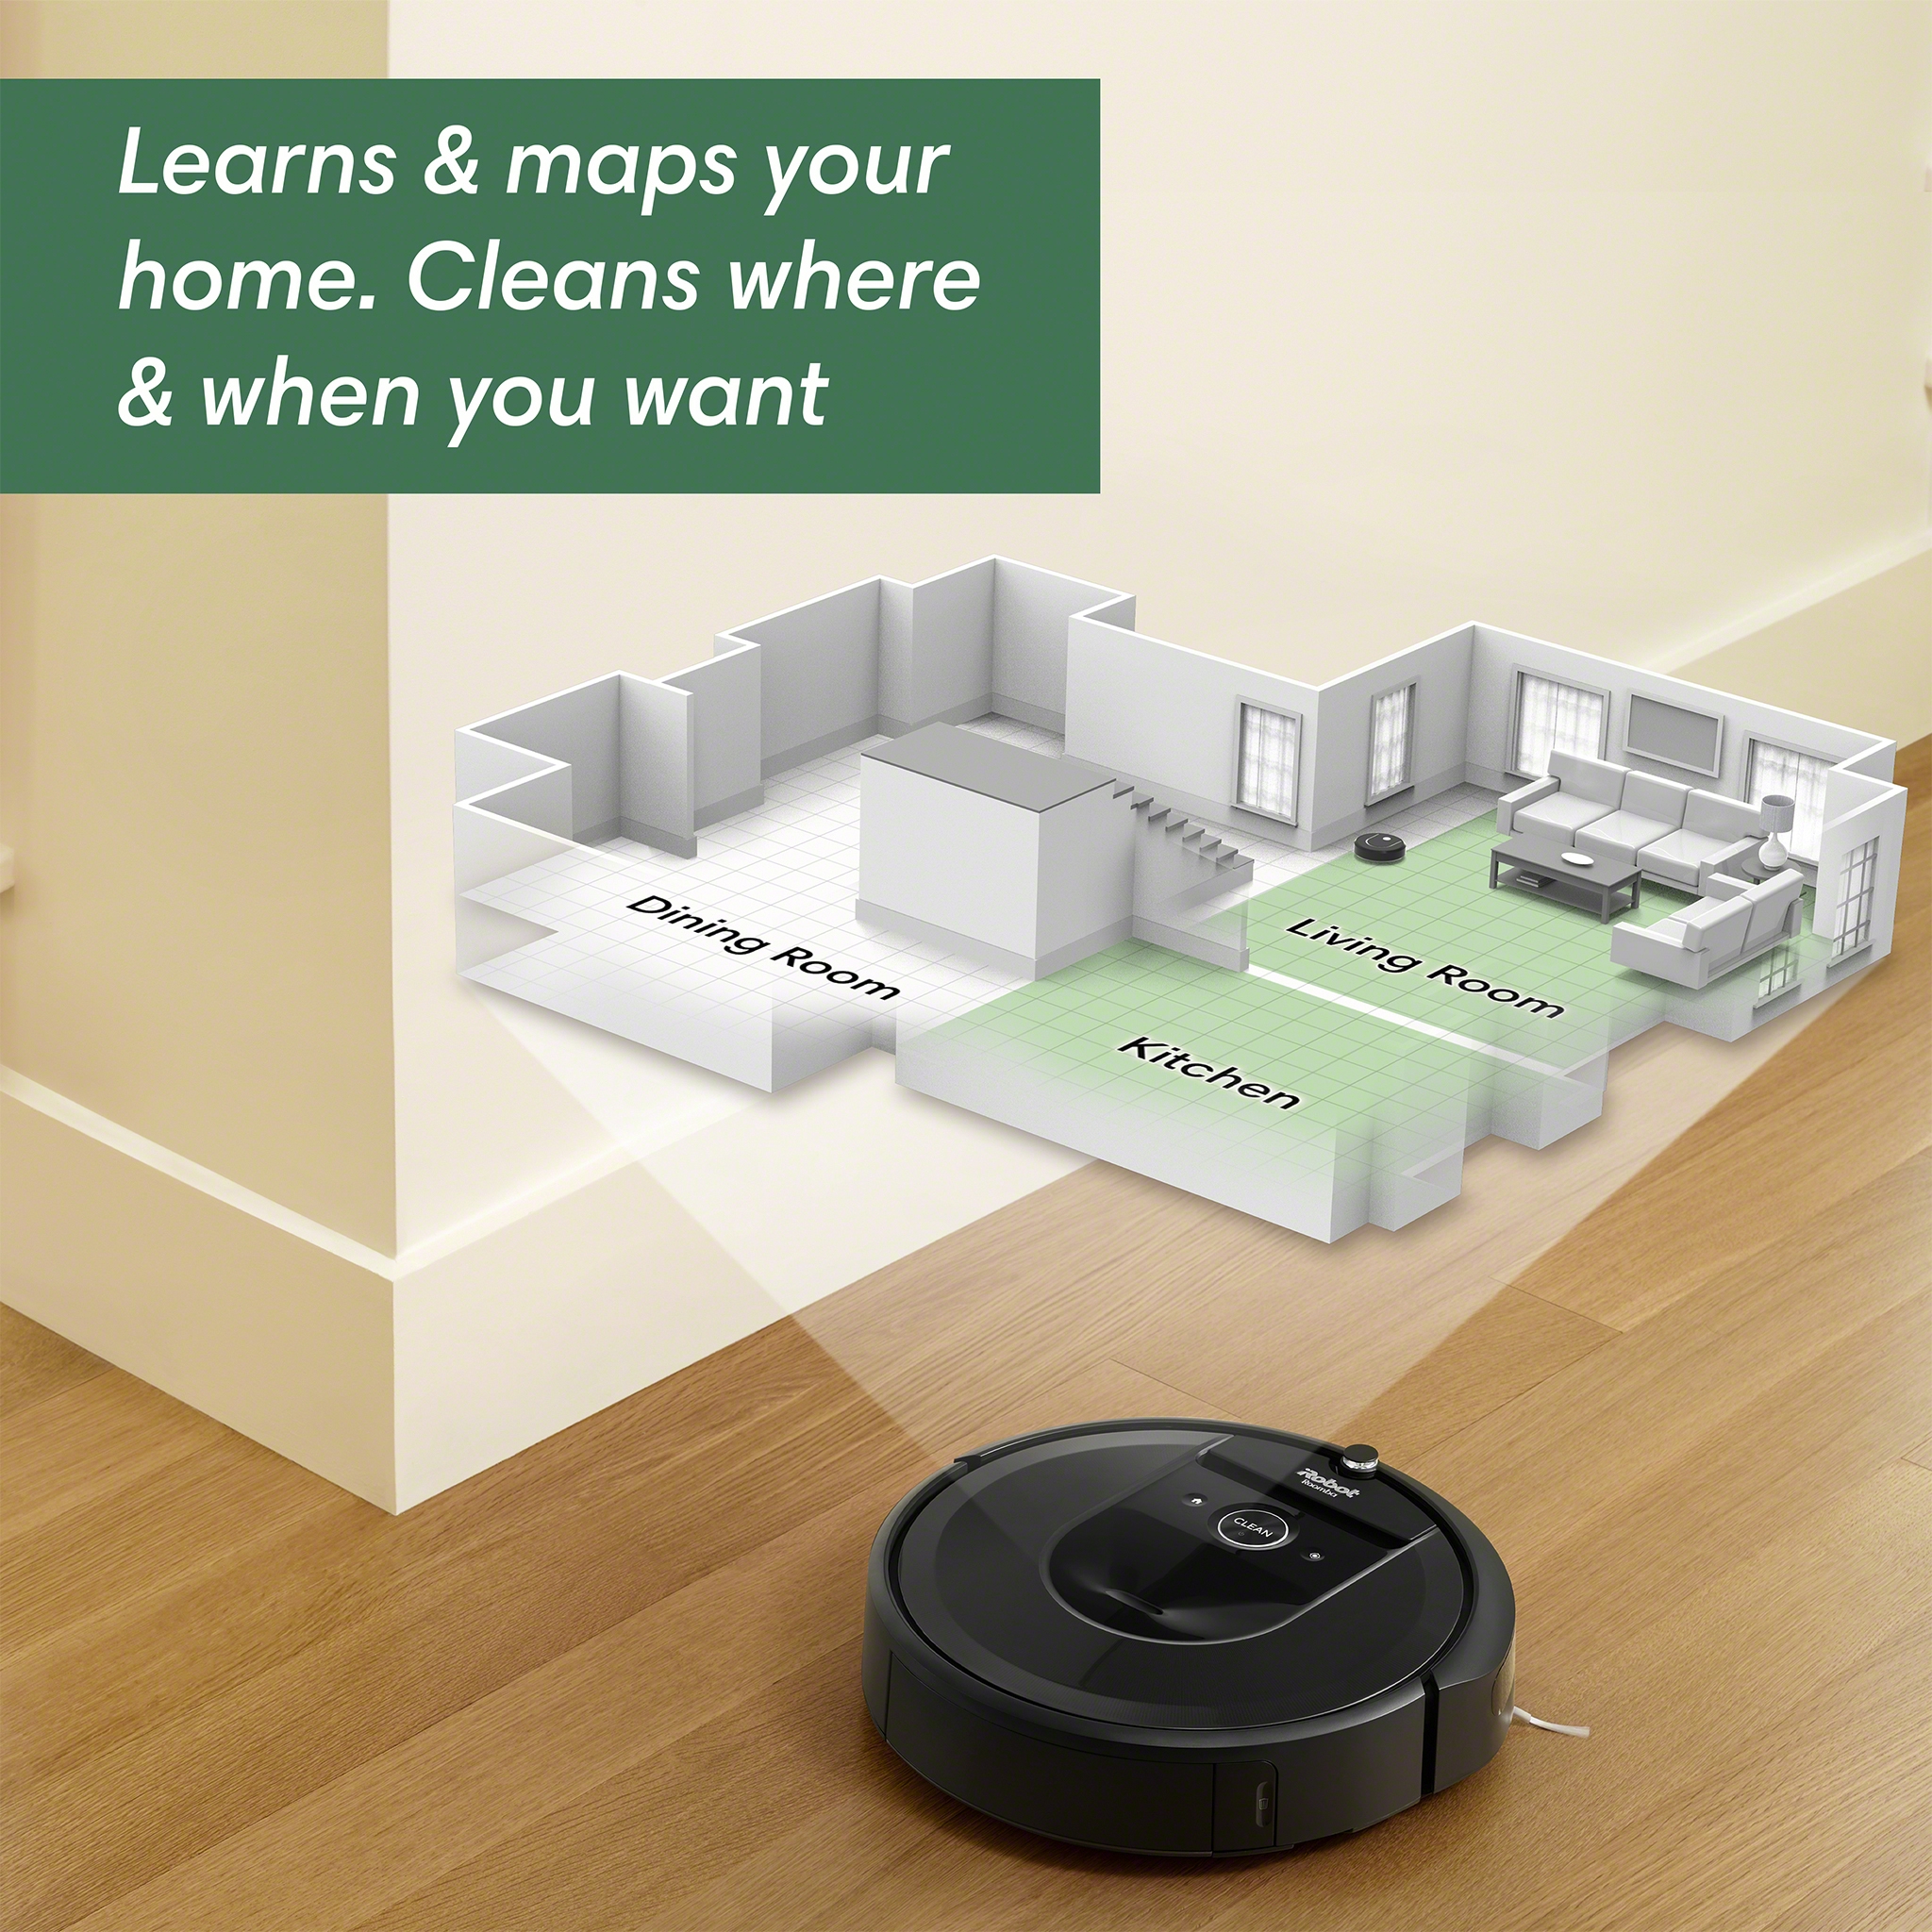 iRobot Roomba i7 (7150) Robot Vacuum- Wi-Fi Connected, Smart Mapping, Works with Google Home, Ideal for Pet Hair, Carpets, Hard Floors - image 9 of 16